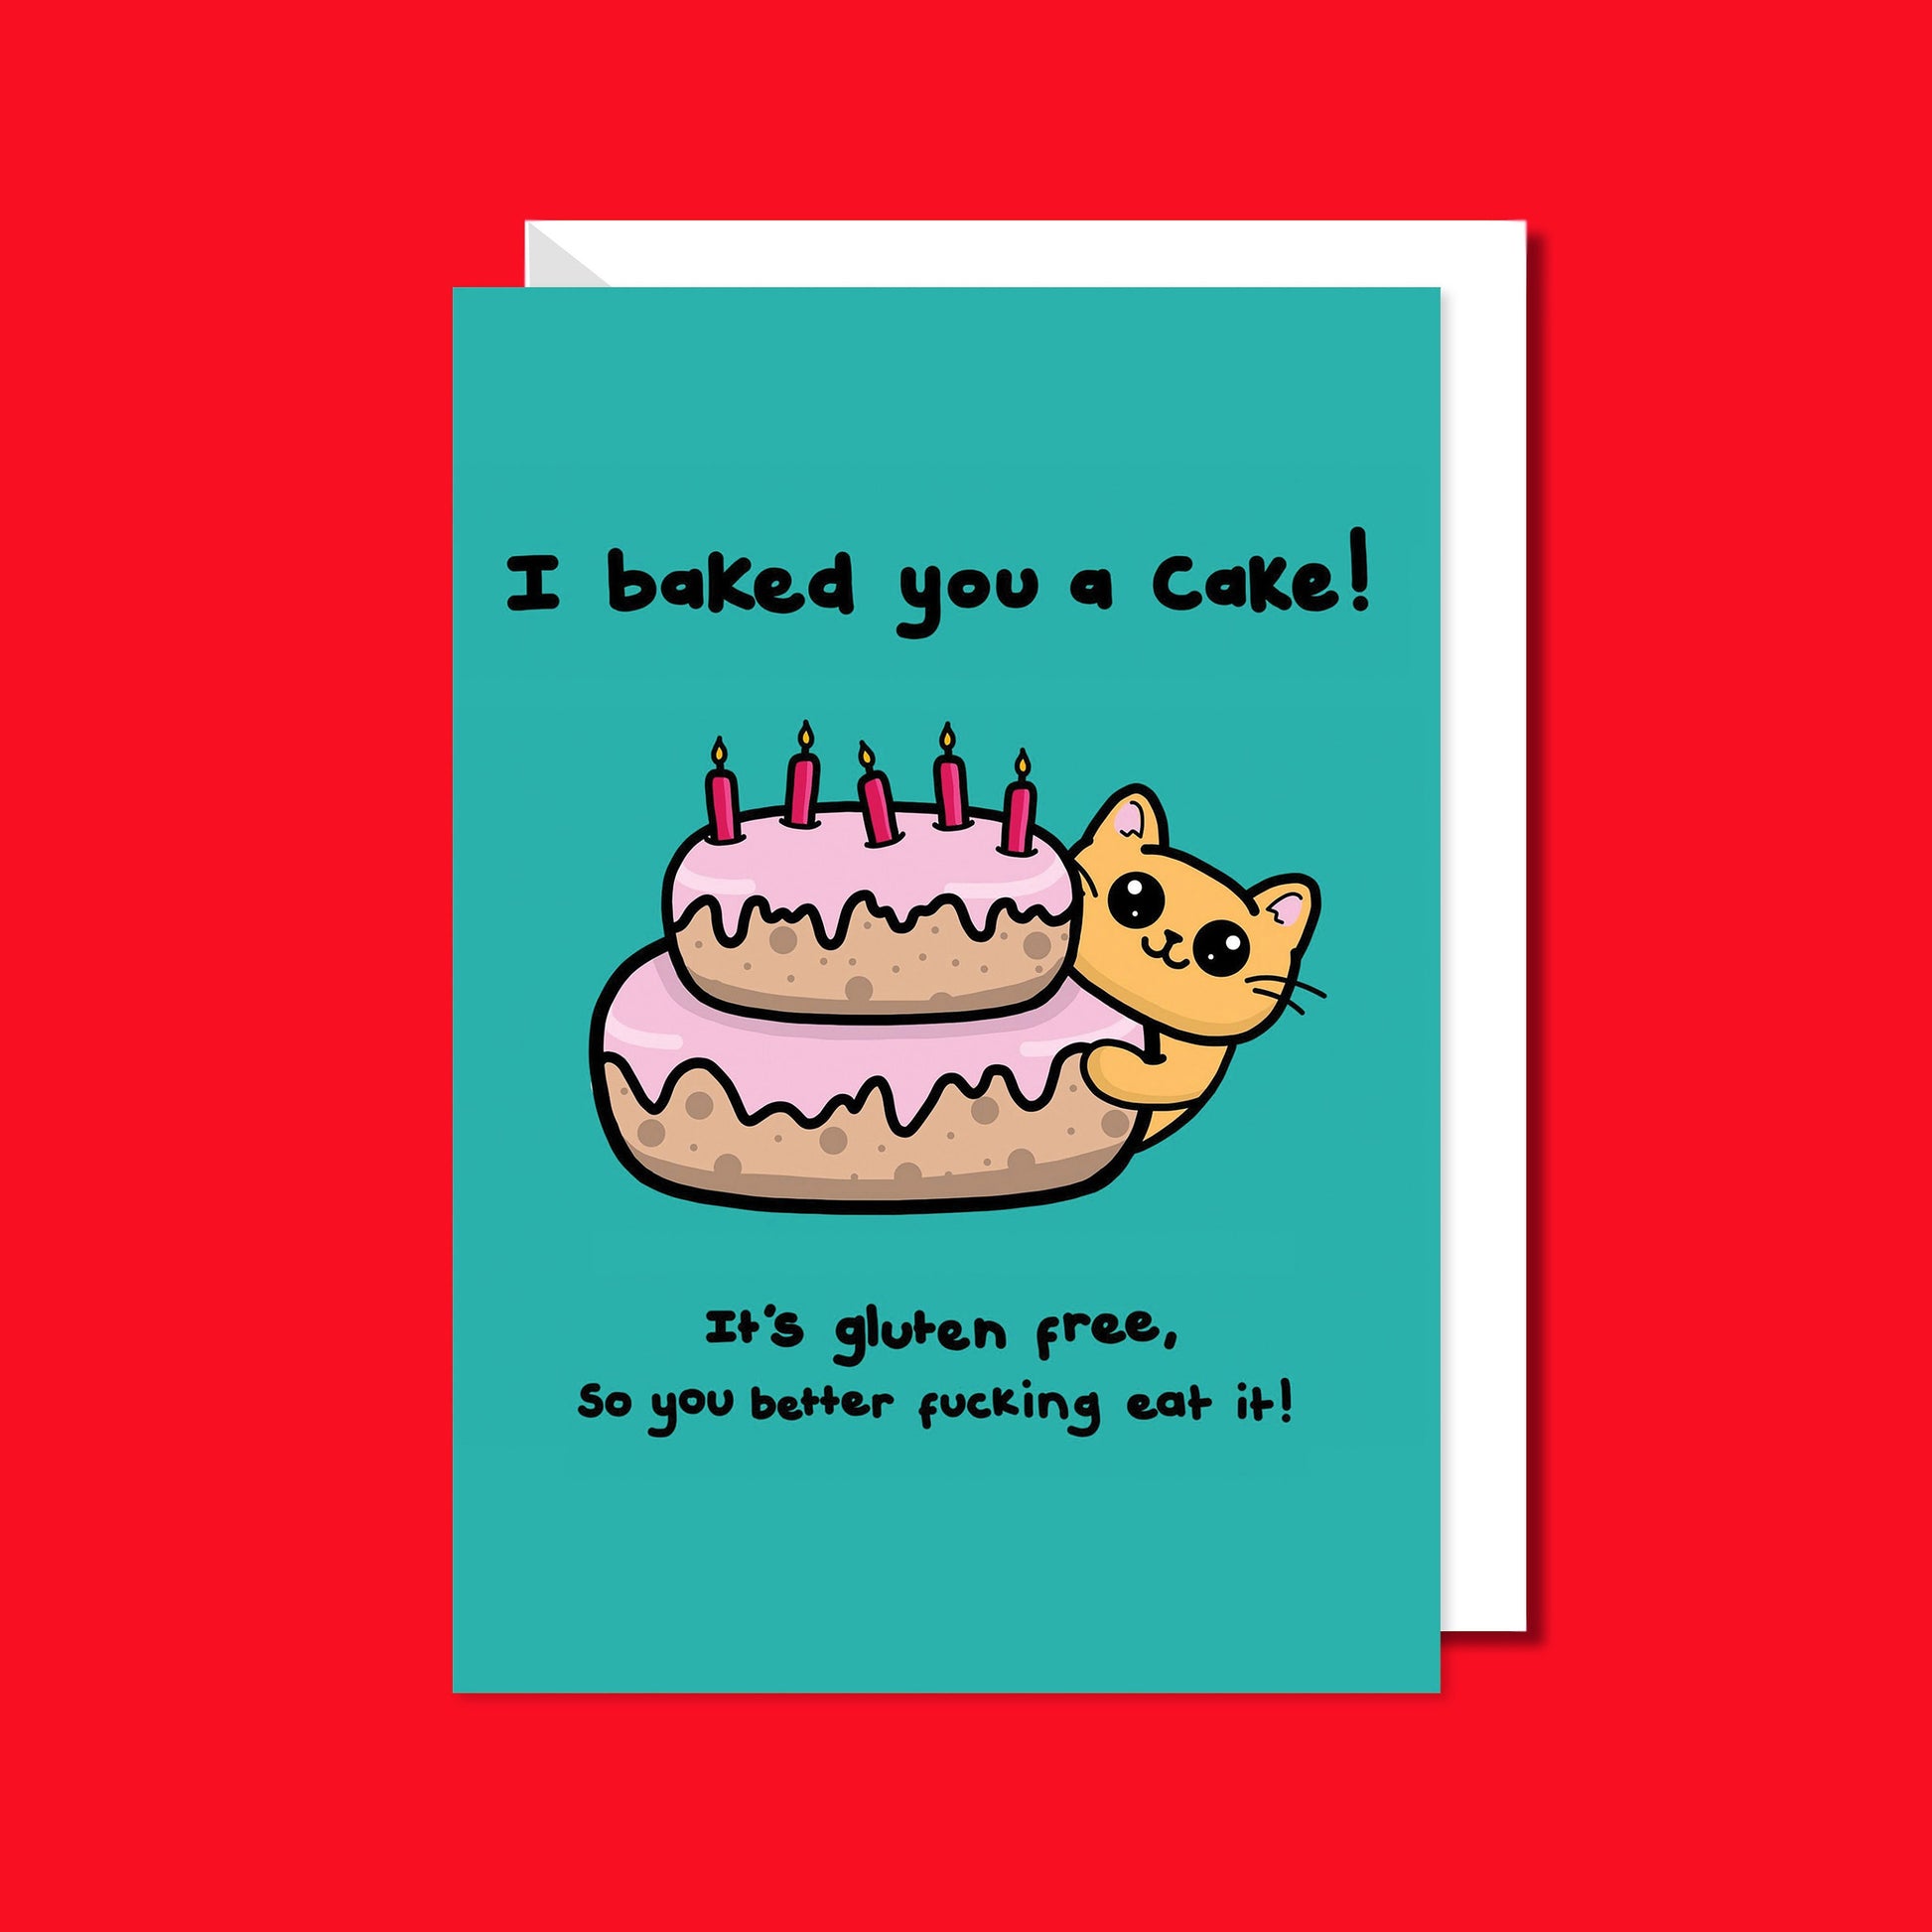 A turquoise blue card that has a drawing of a yellow cat poking around a pink layered cake with candles in the top. Text on the card says I baked you a cake! It's gluten free, so you better fucking eat it! The a6 cat themed birthday card is on a red background with a white envelope underneath.